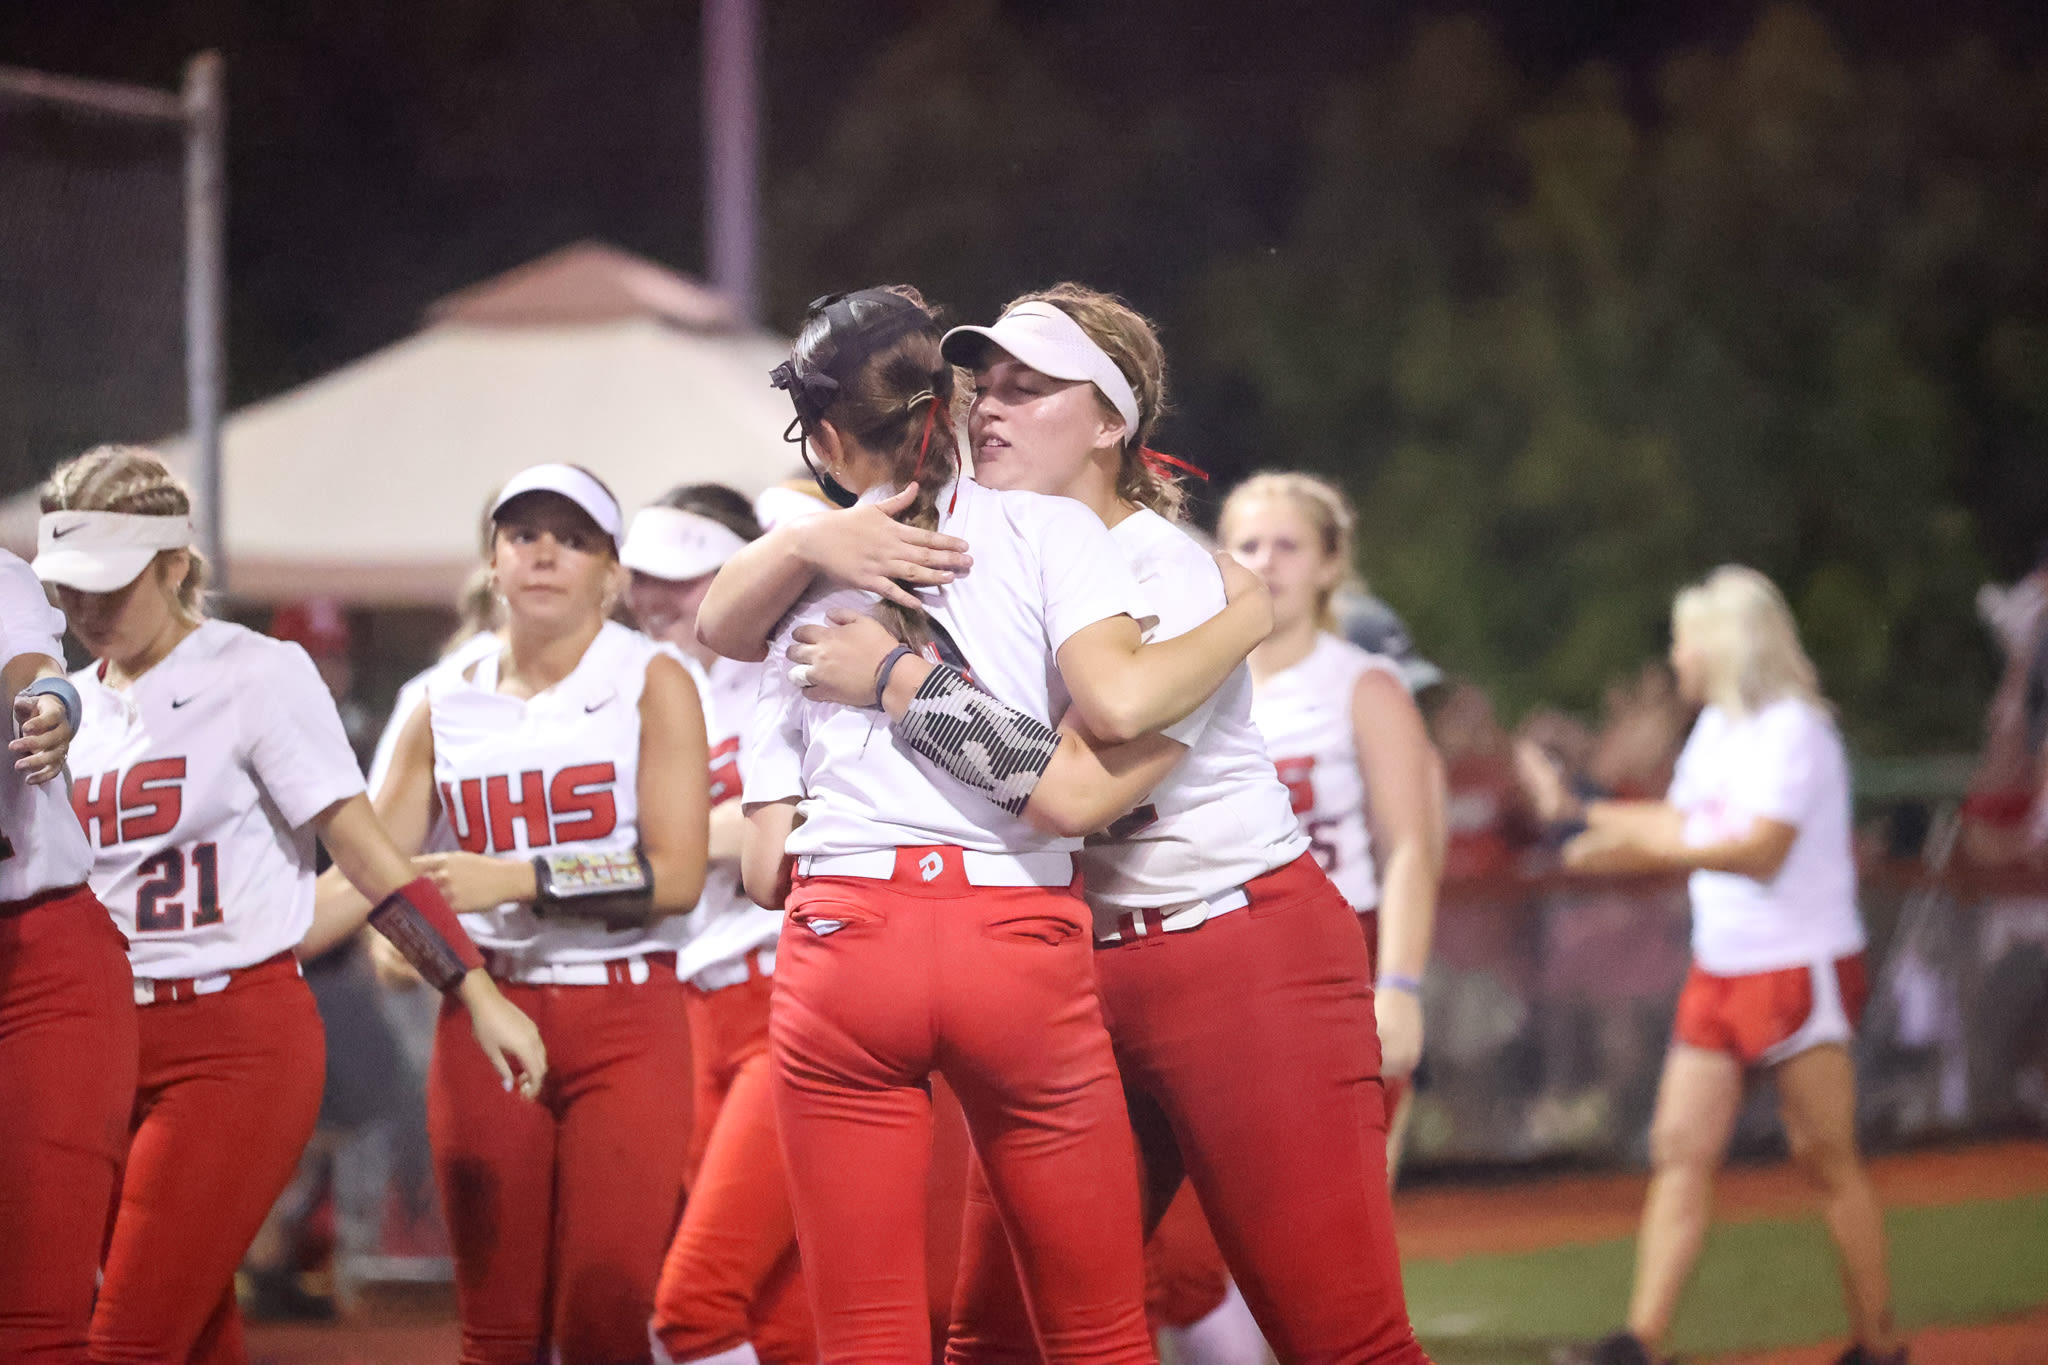 University gets past Washington 6-5 in 9 innings, secures spot in state final for first time - WV MetroNews